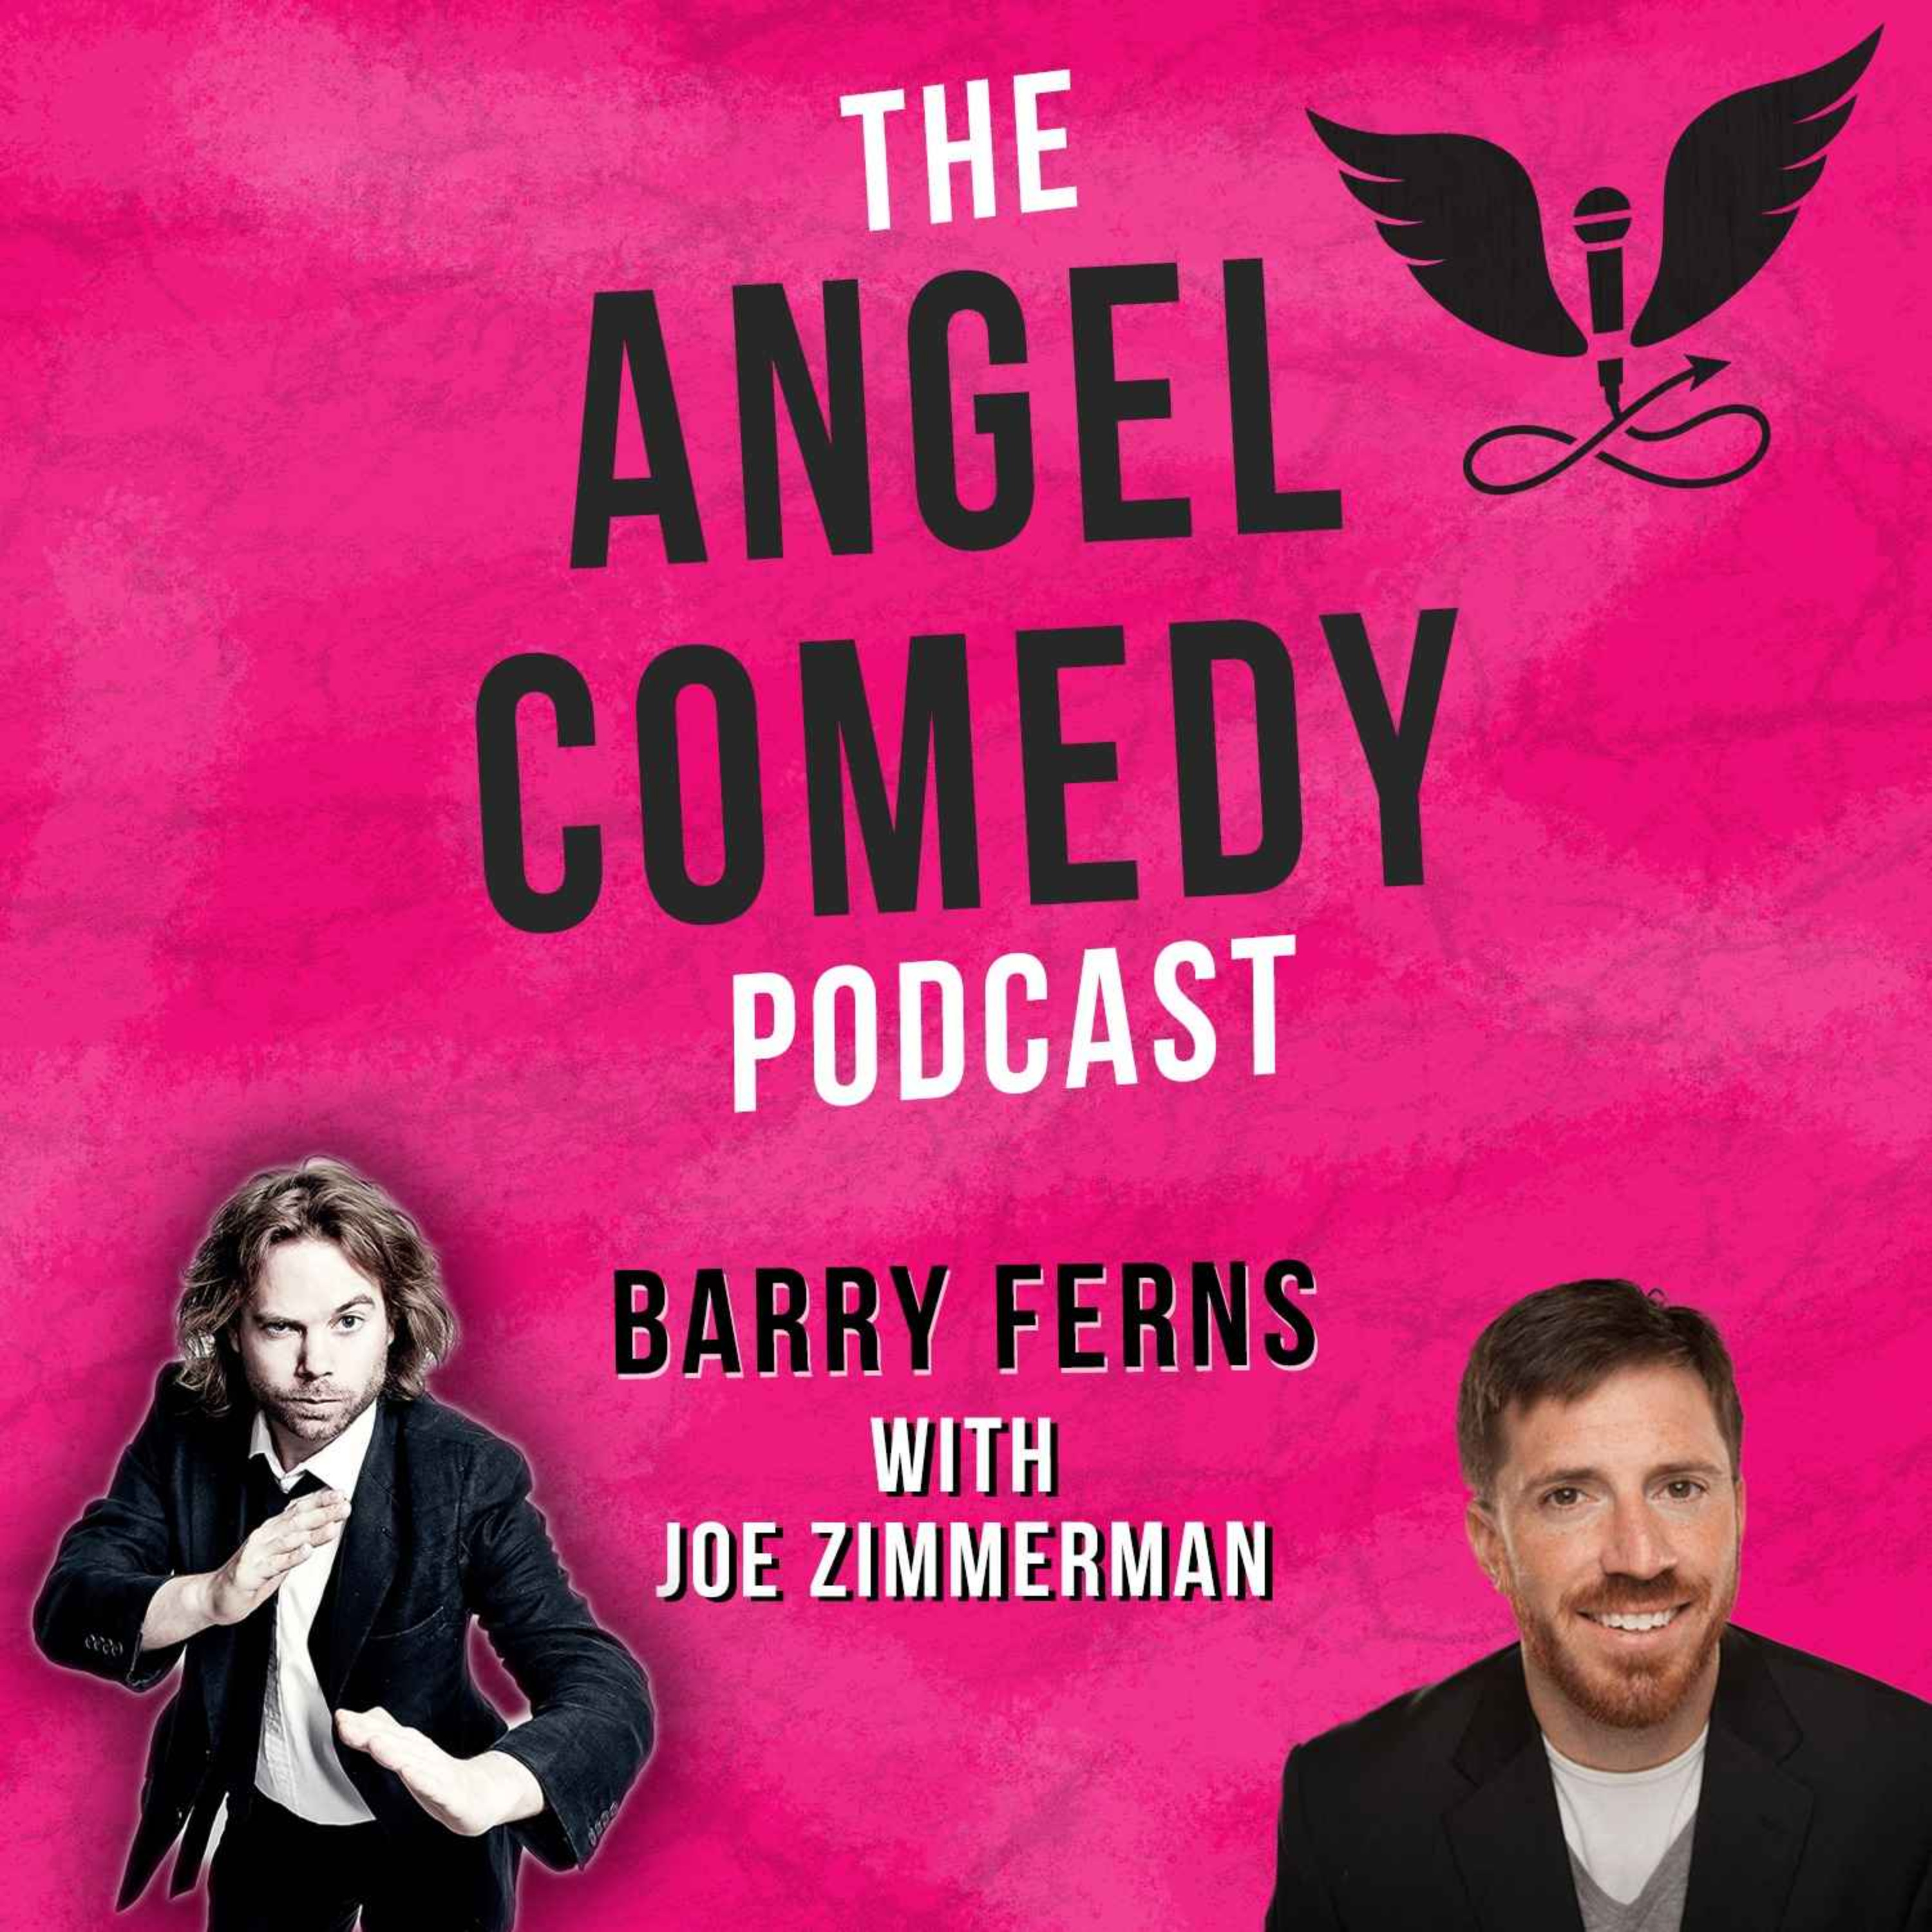 The Angel Comedy Podcast with Joe Zimmerman